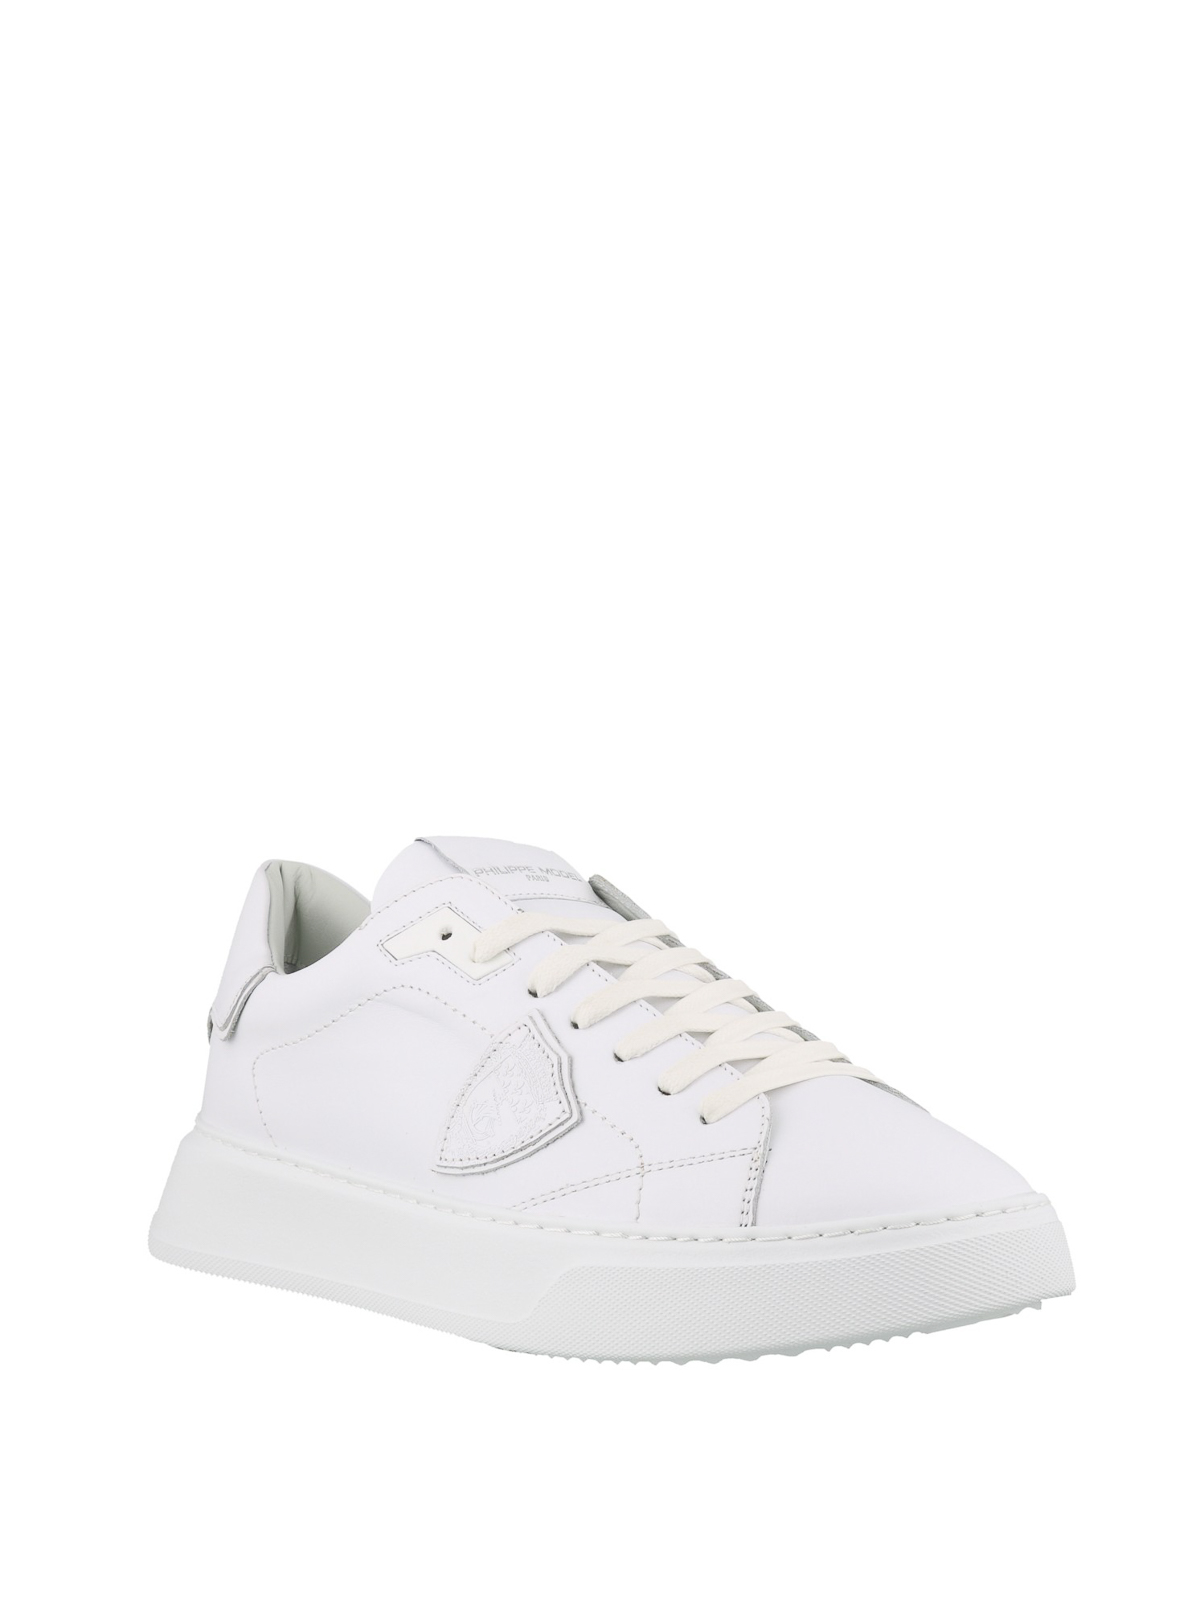 Shop Philippe Model Temple Sneakers In Blanco